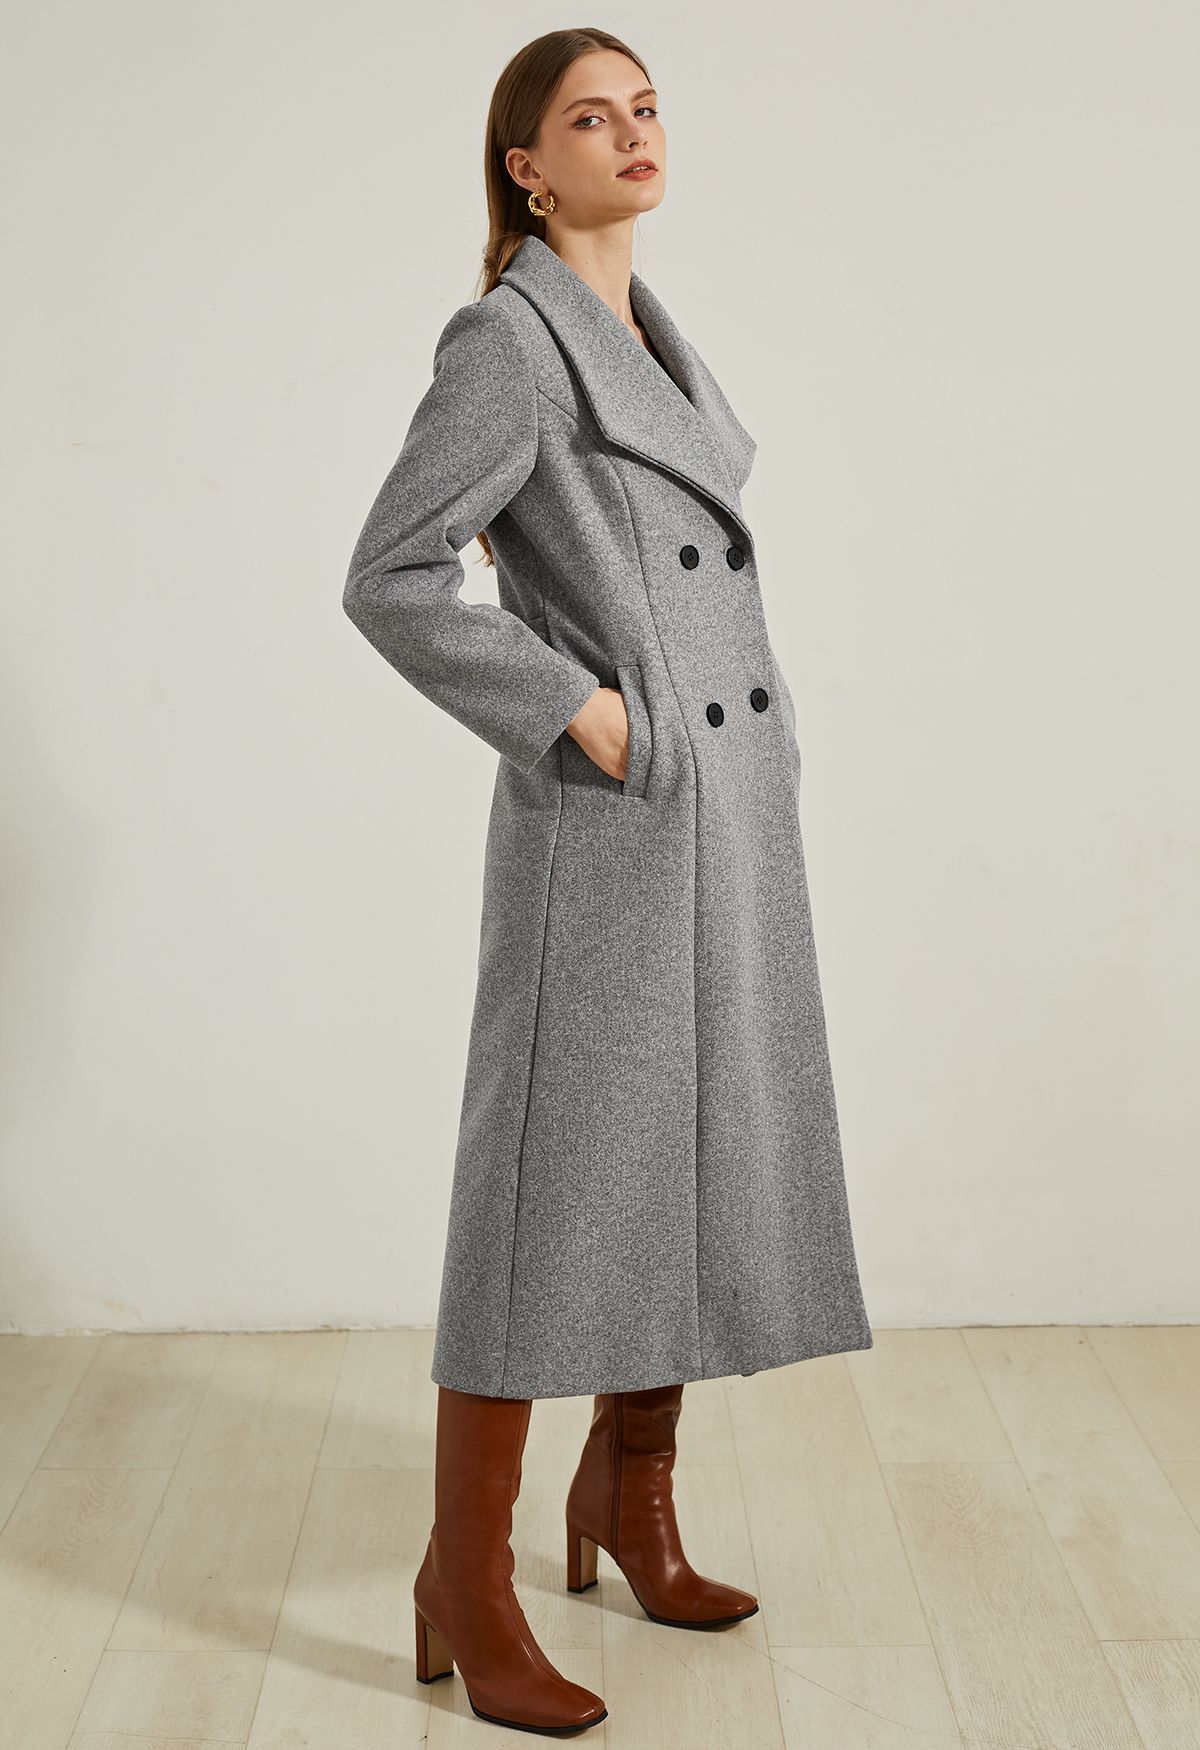 Wool Blend Double Breasted Tailored Coat